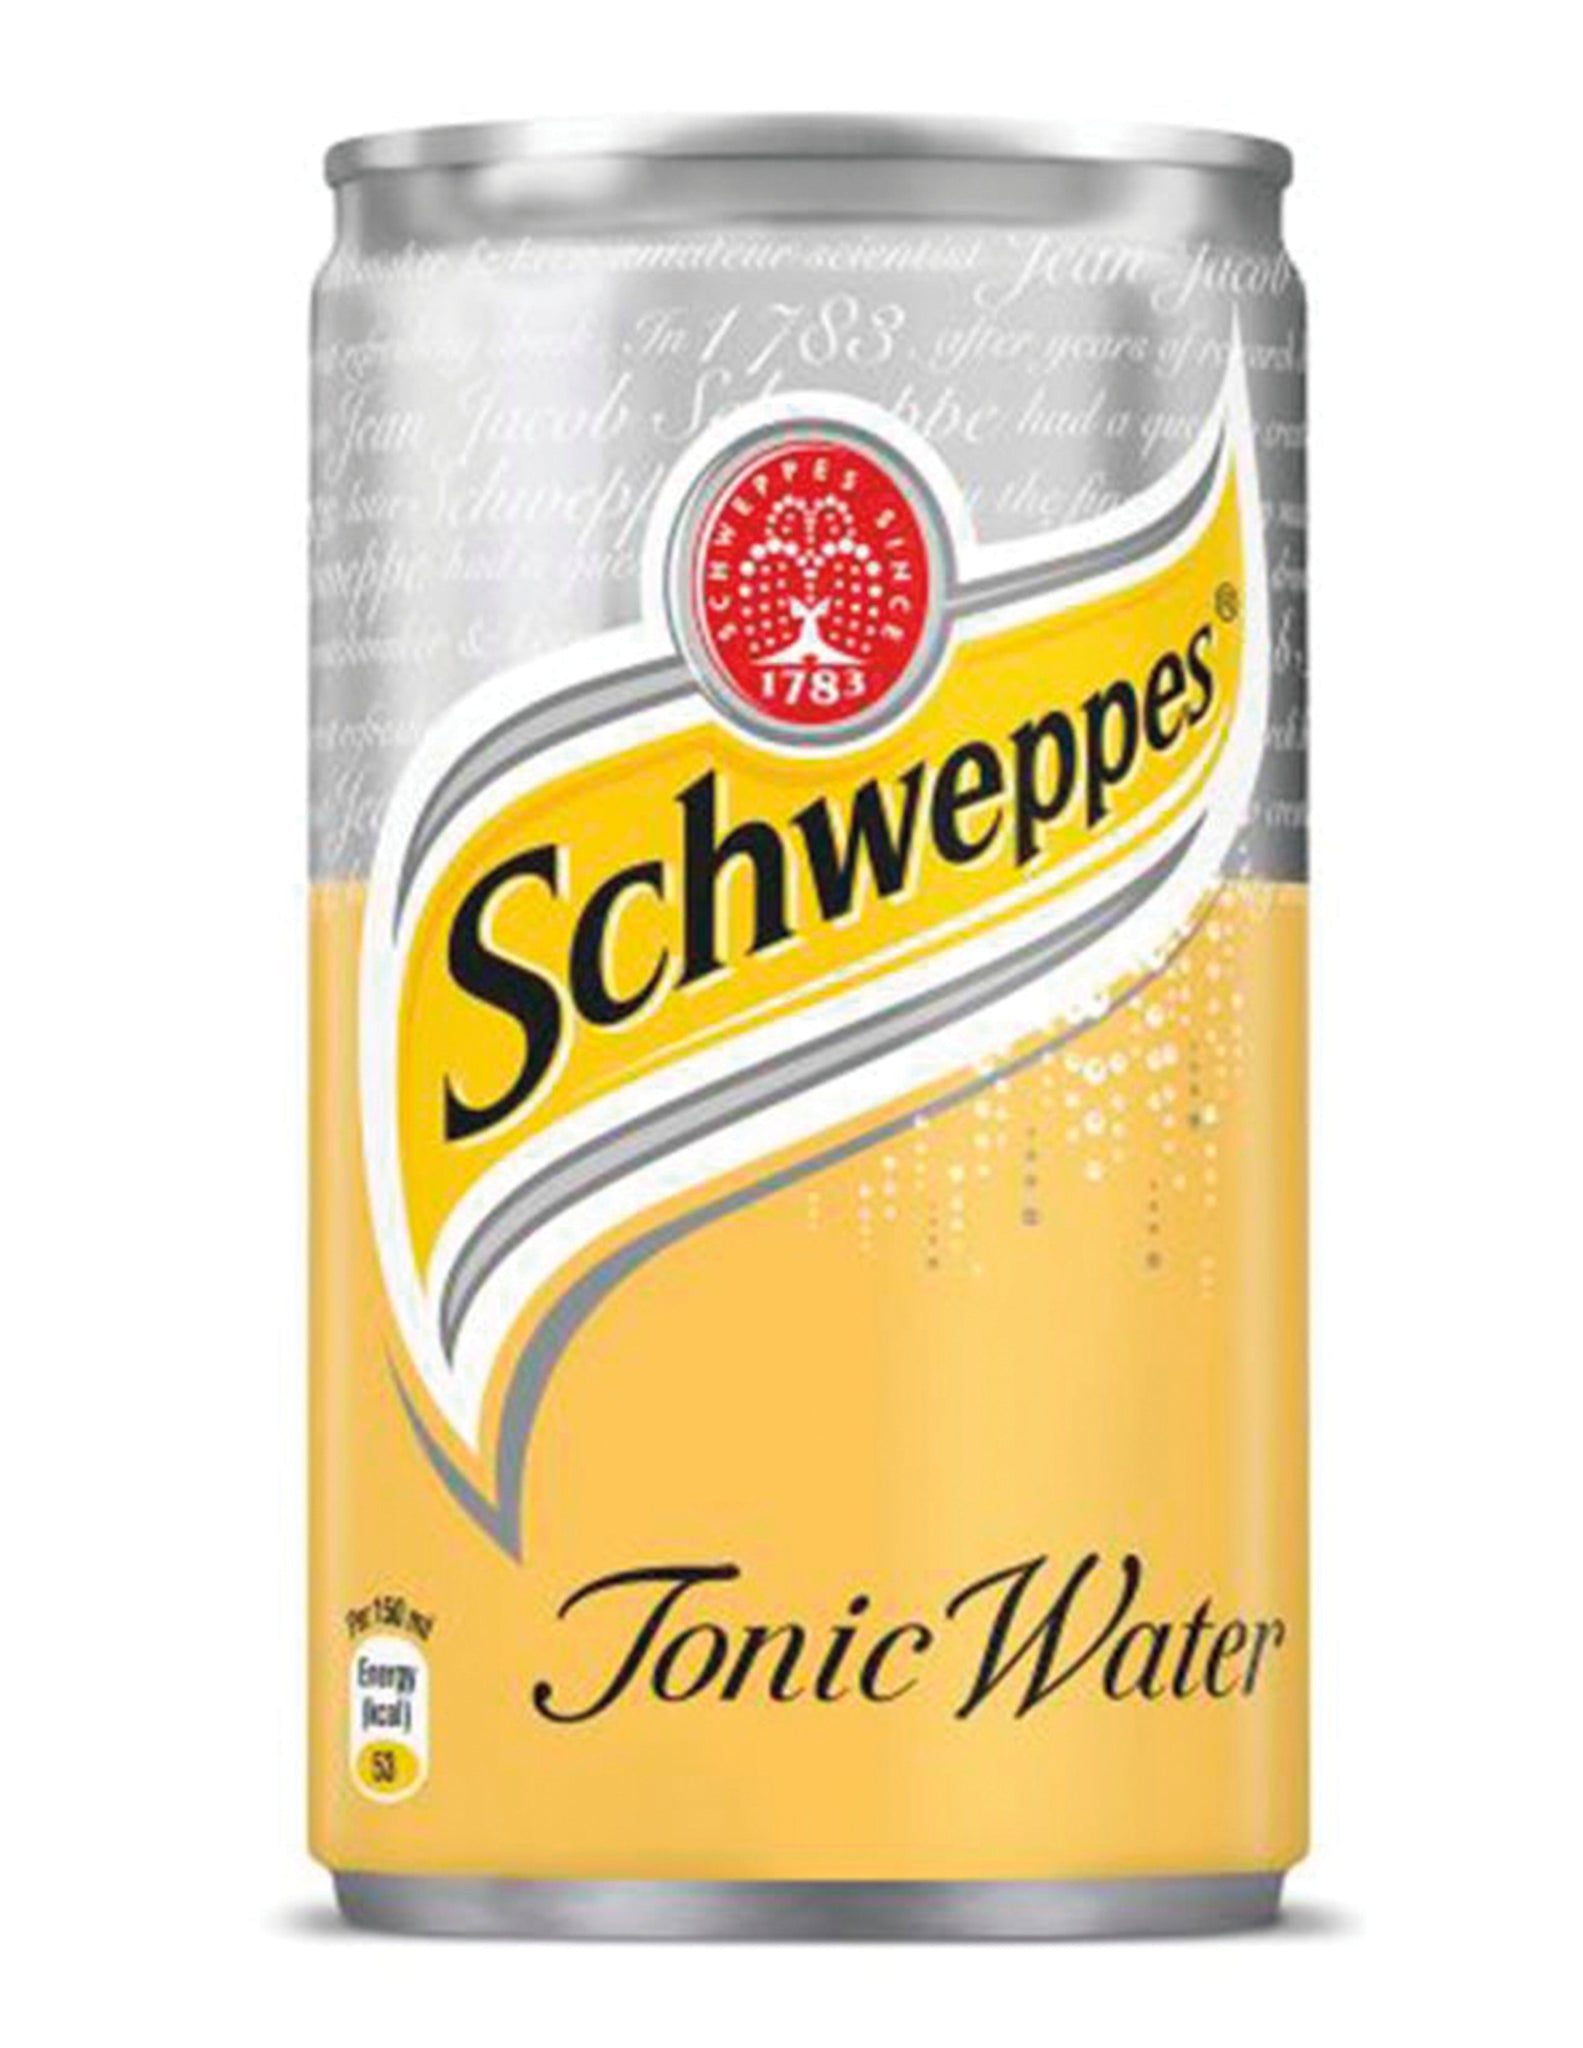 tha>Schweppes tonic water 24 x 330 ml cans